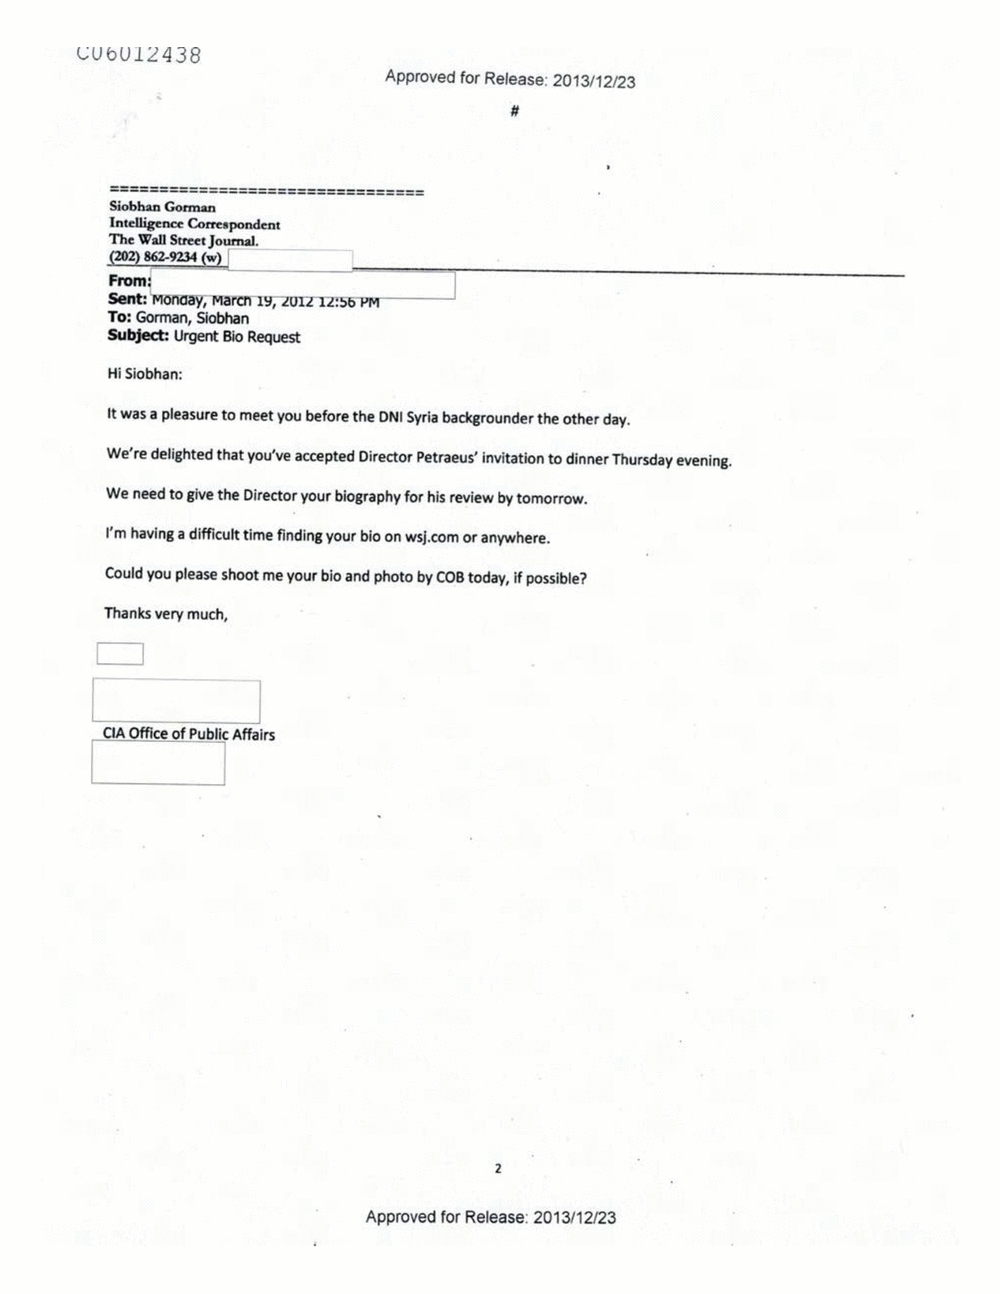 Page 21 from Email Correspondence Between Reporters and CIA Flacks